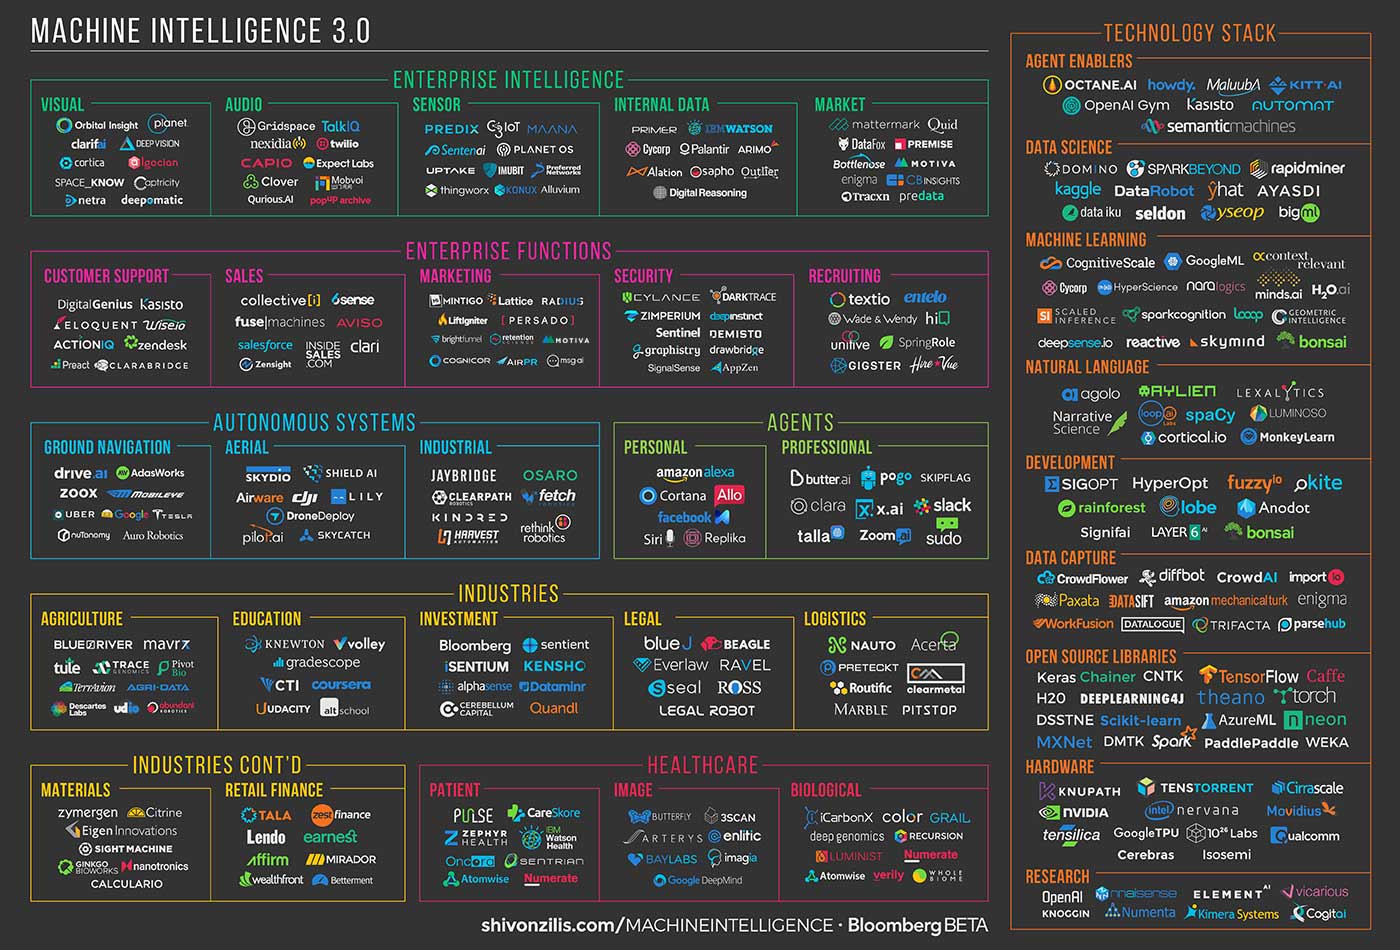 The current state of machine intelligence 3.0.